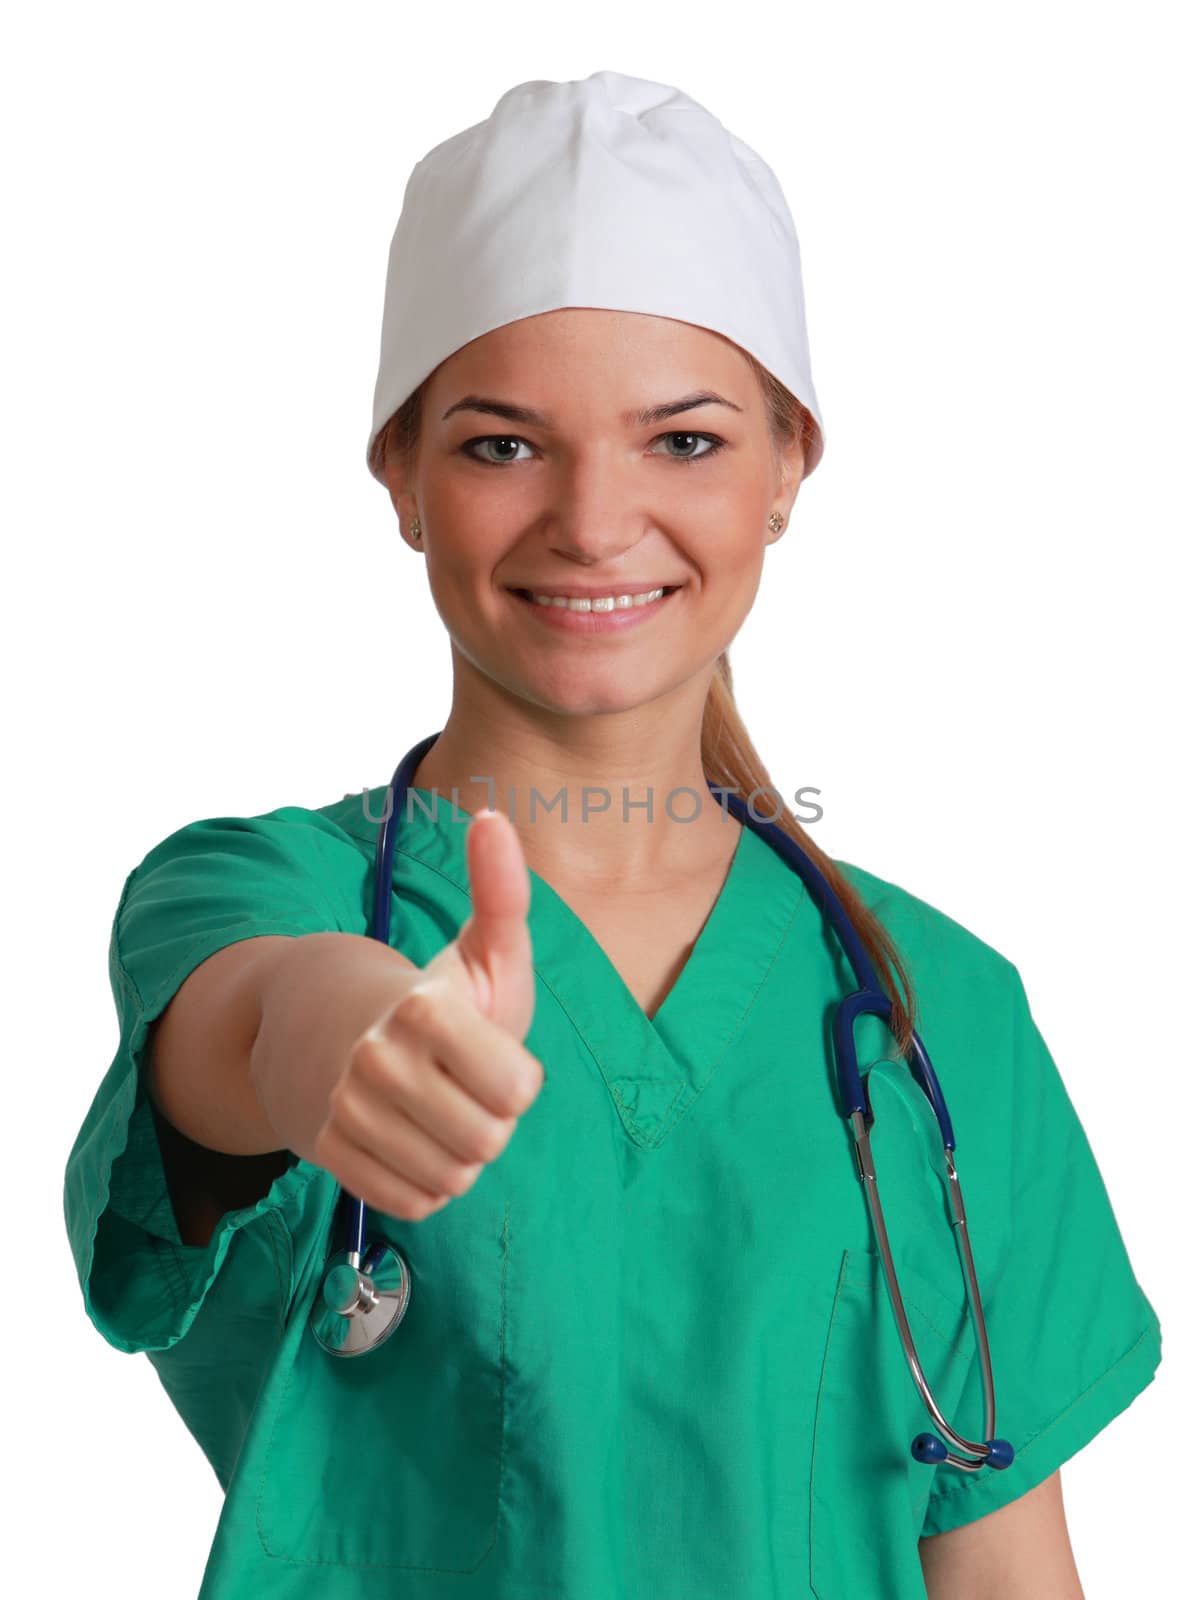 Portrait of a smiling young woman doctor with her right thumb up, isolated against a white background.